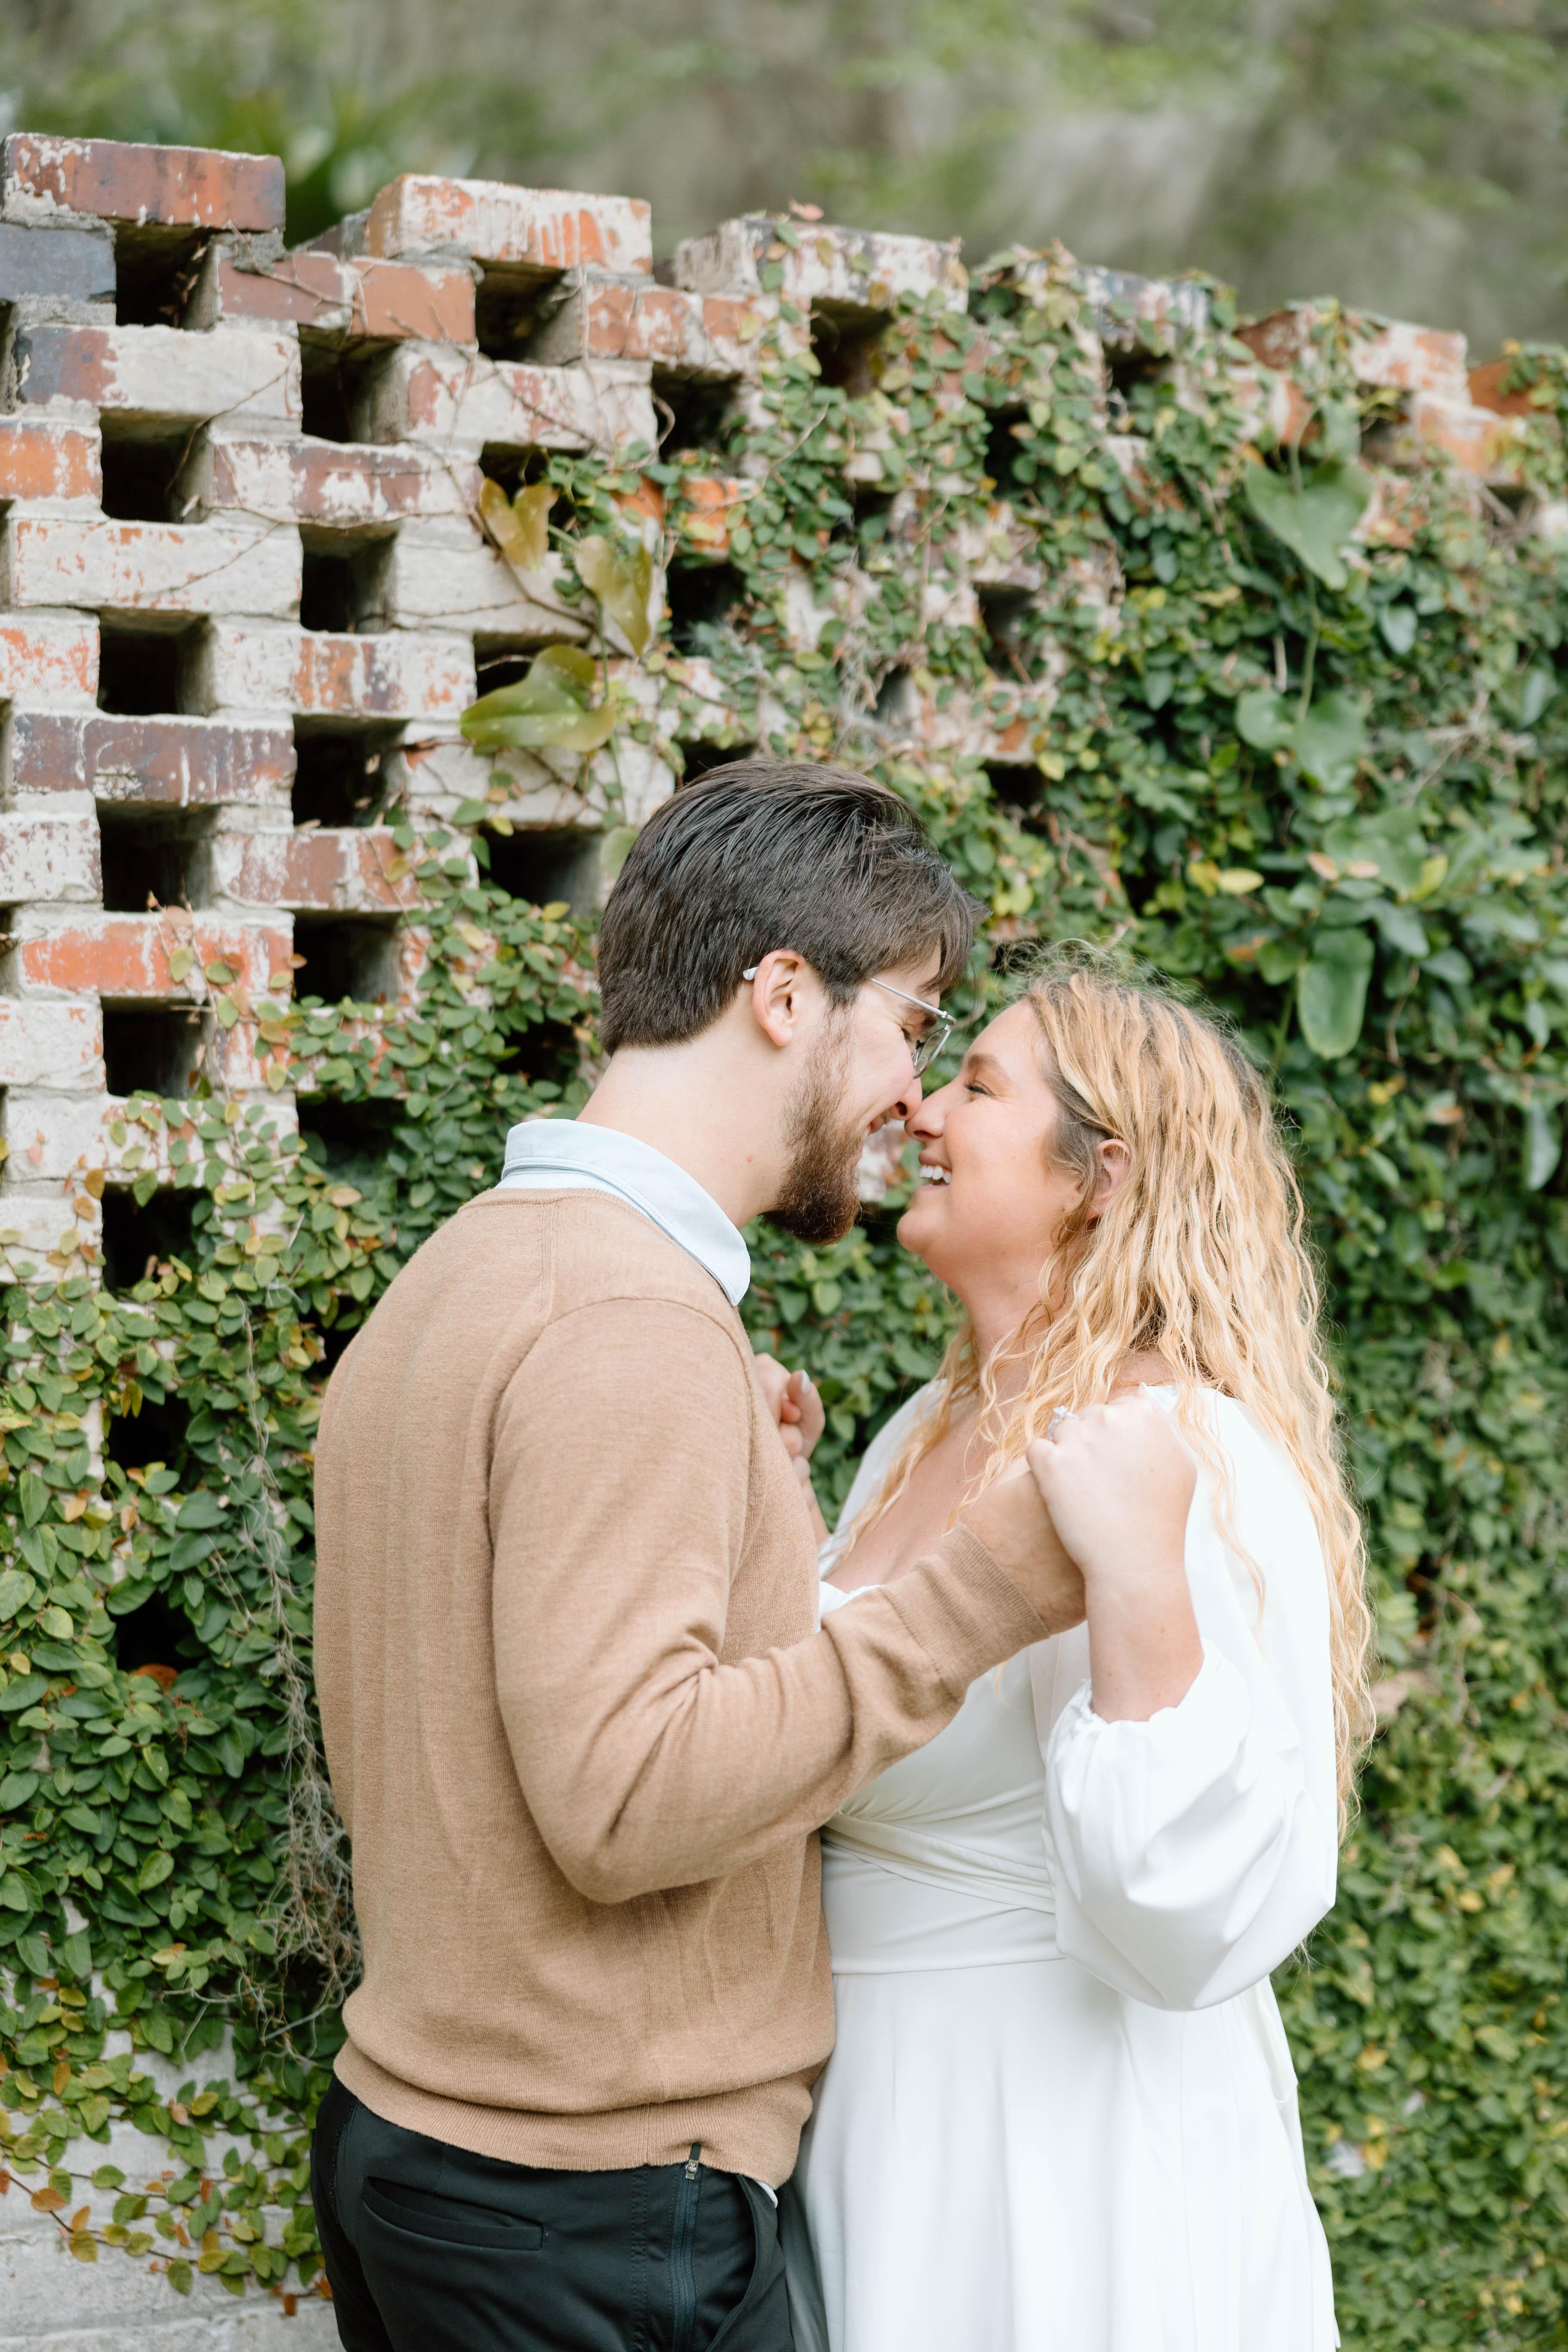 The Wedding Website of Summer Brooks and Dylan Collins